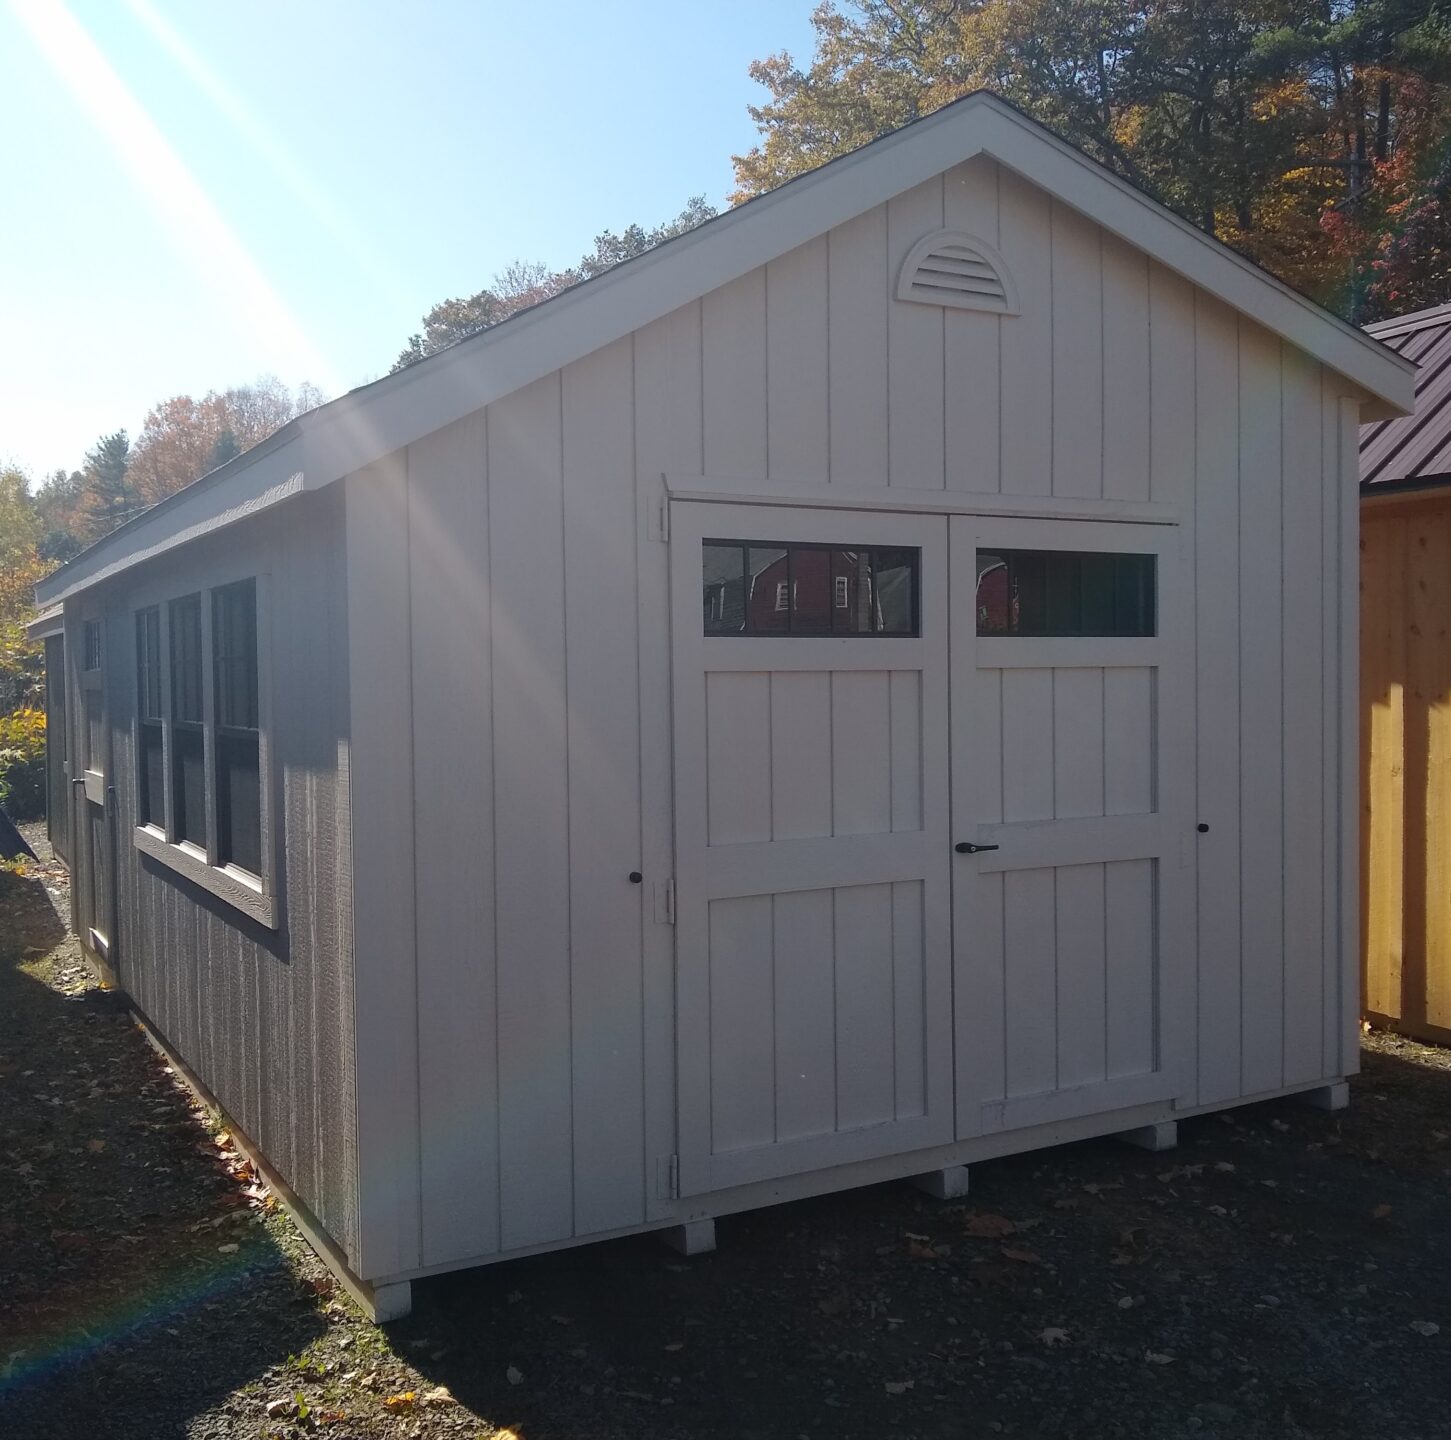 Cream colored shed with double doors and 3 windows